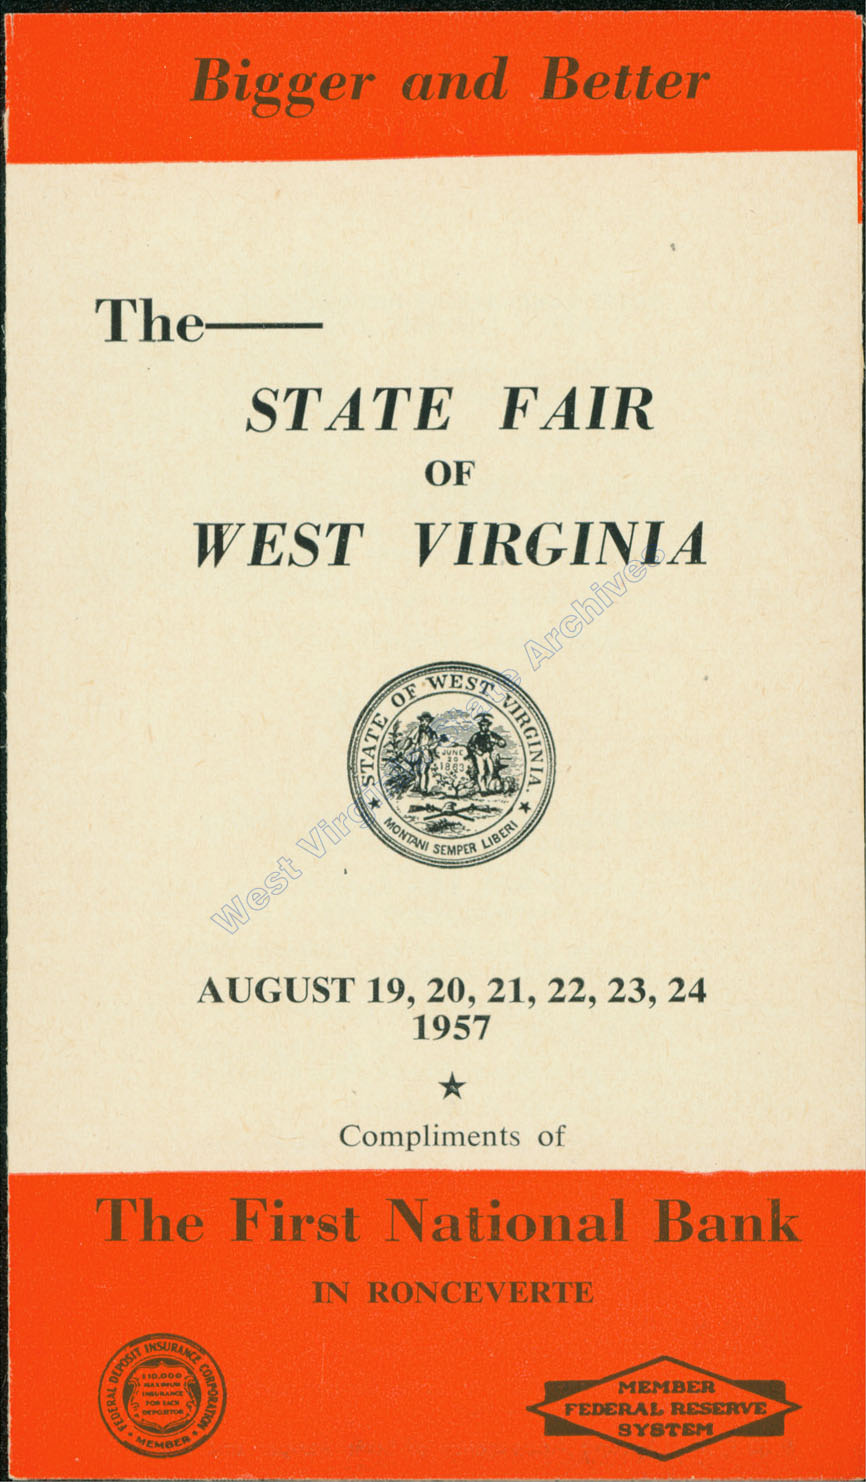 Program for the State Fair of West Virginia, August 19-24, 1957. (Ar1803)